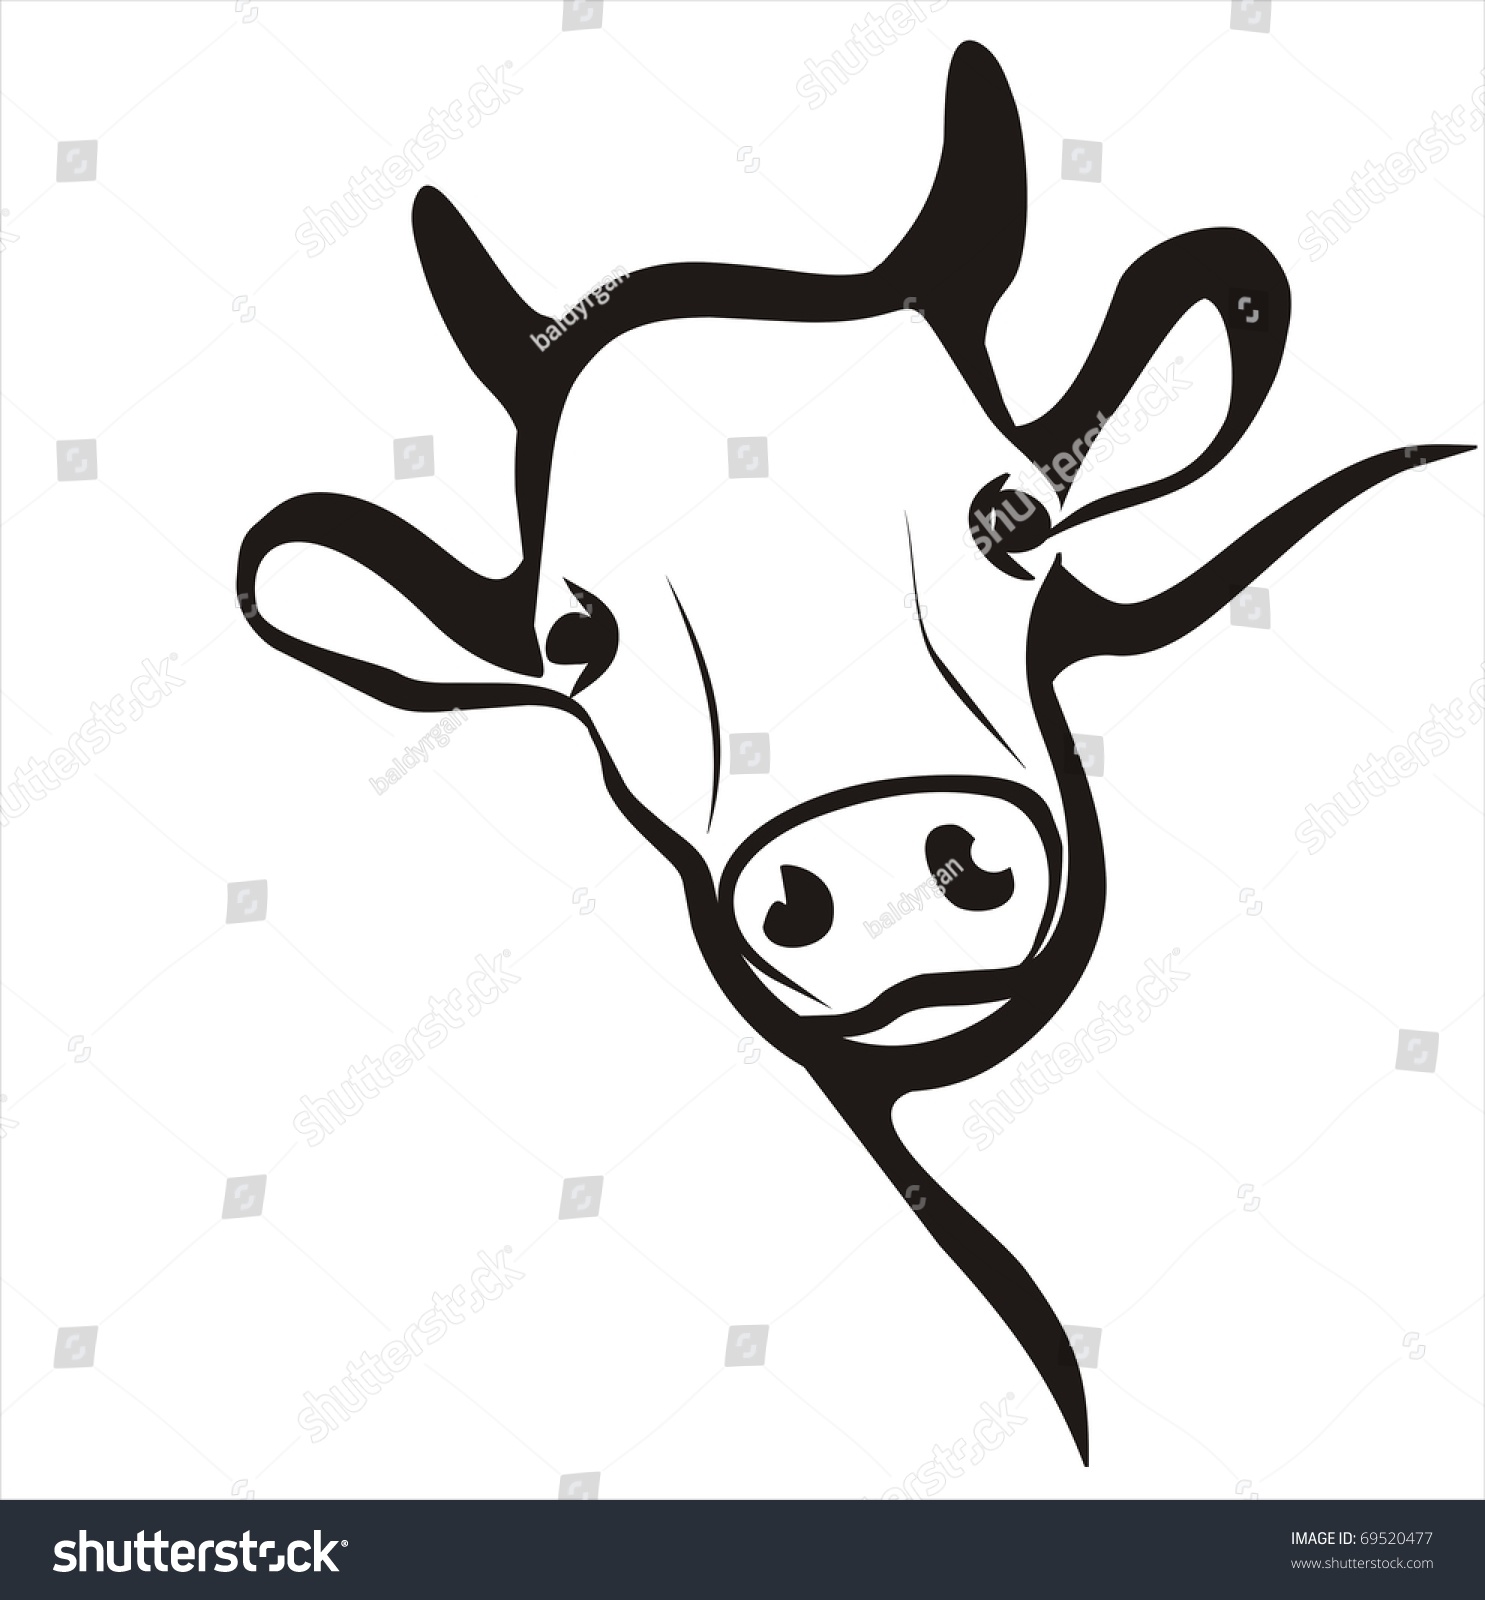 cow clipart simple - photo #41